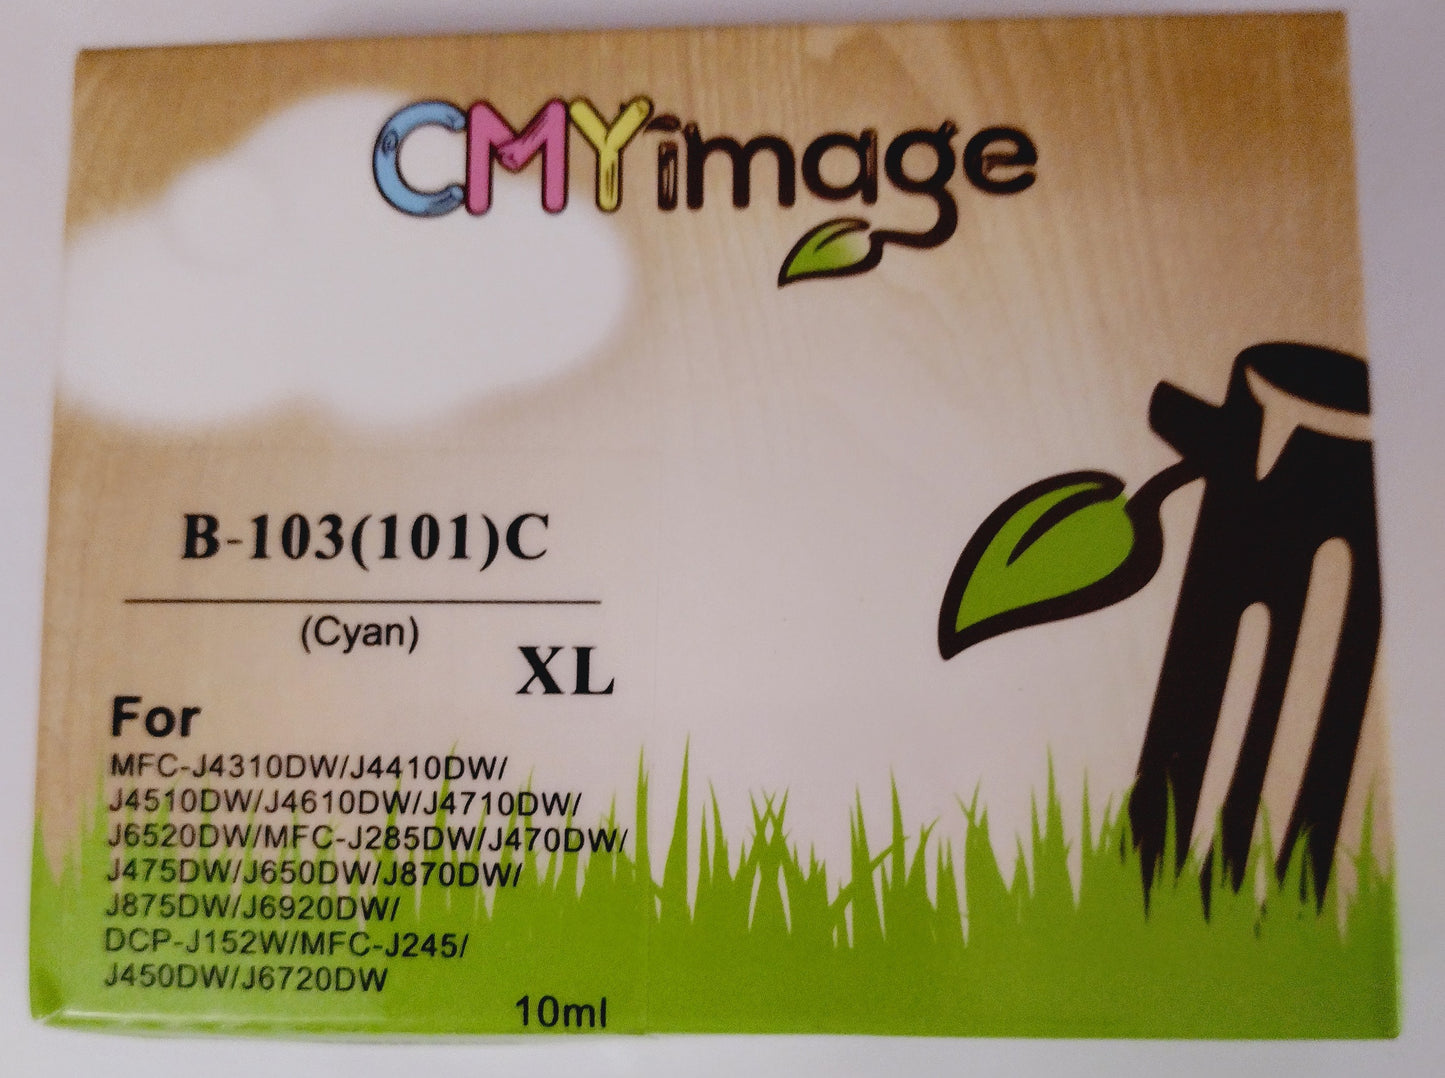 CMY Image Compatible Brother Ink Jet Printer Ink B103(101) XL